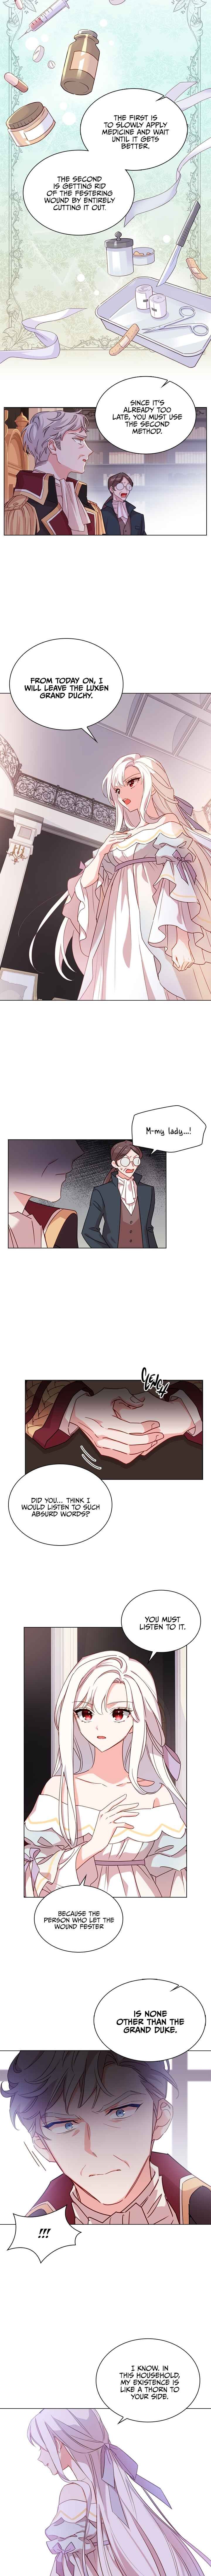 The Lady Wants to Rest Chapter 3 - Page 6